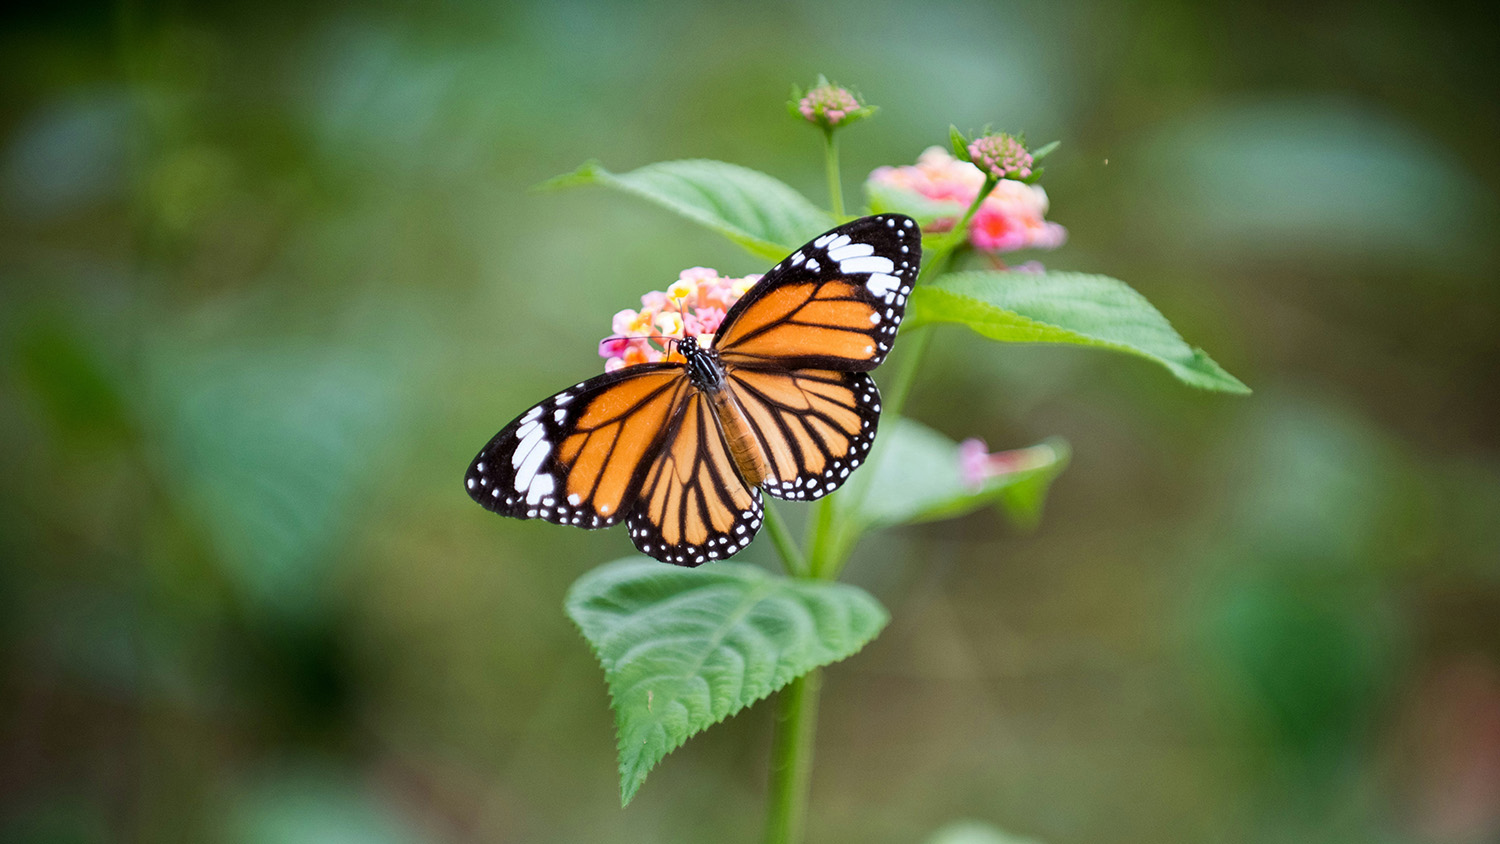 A monarch butterfly pollinates a flower.